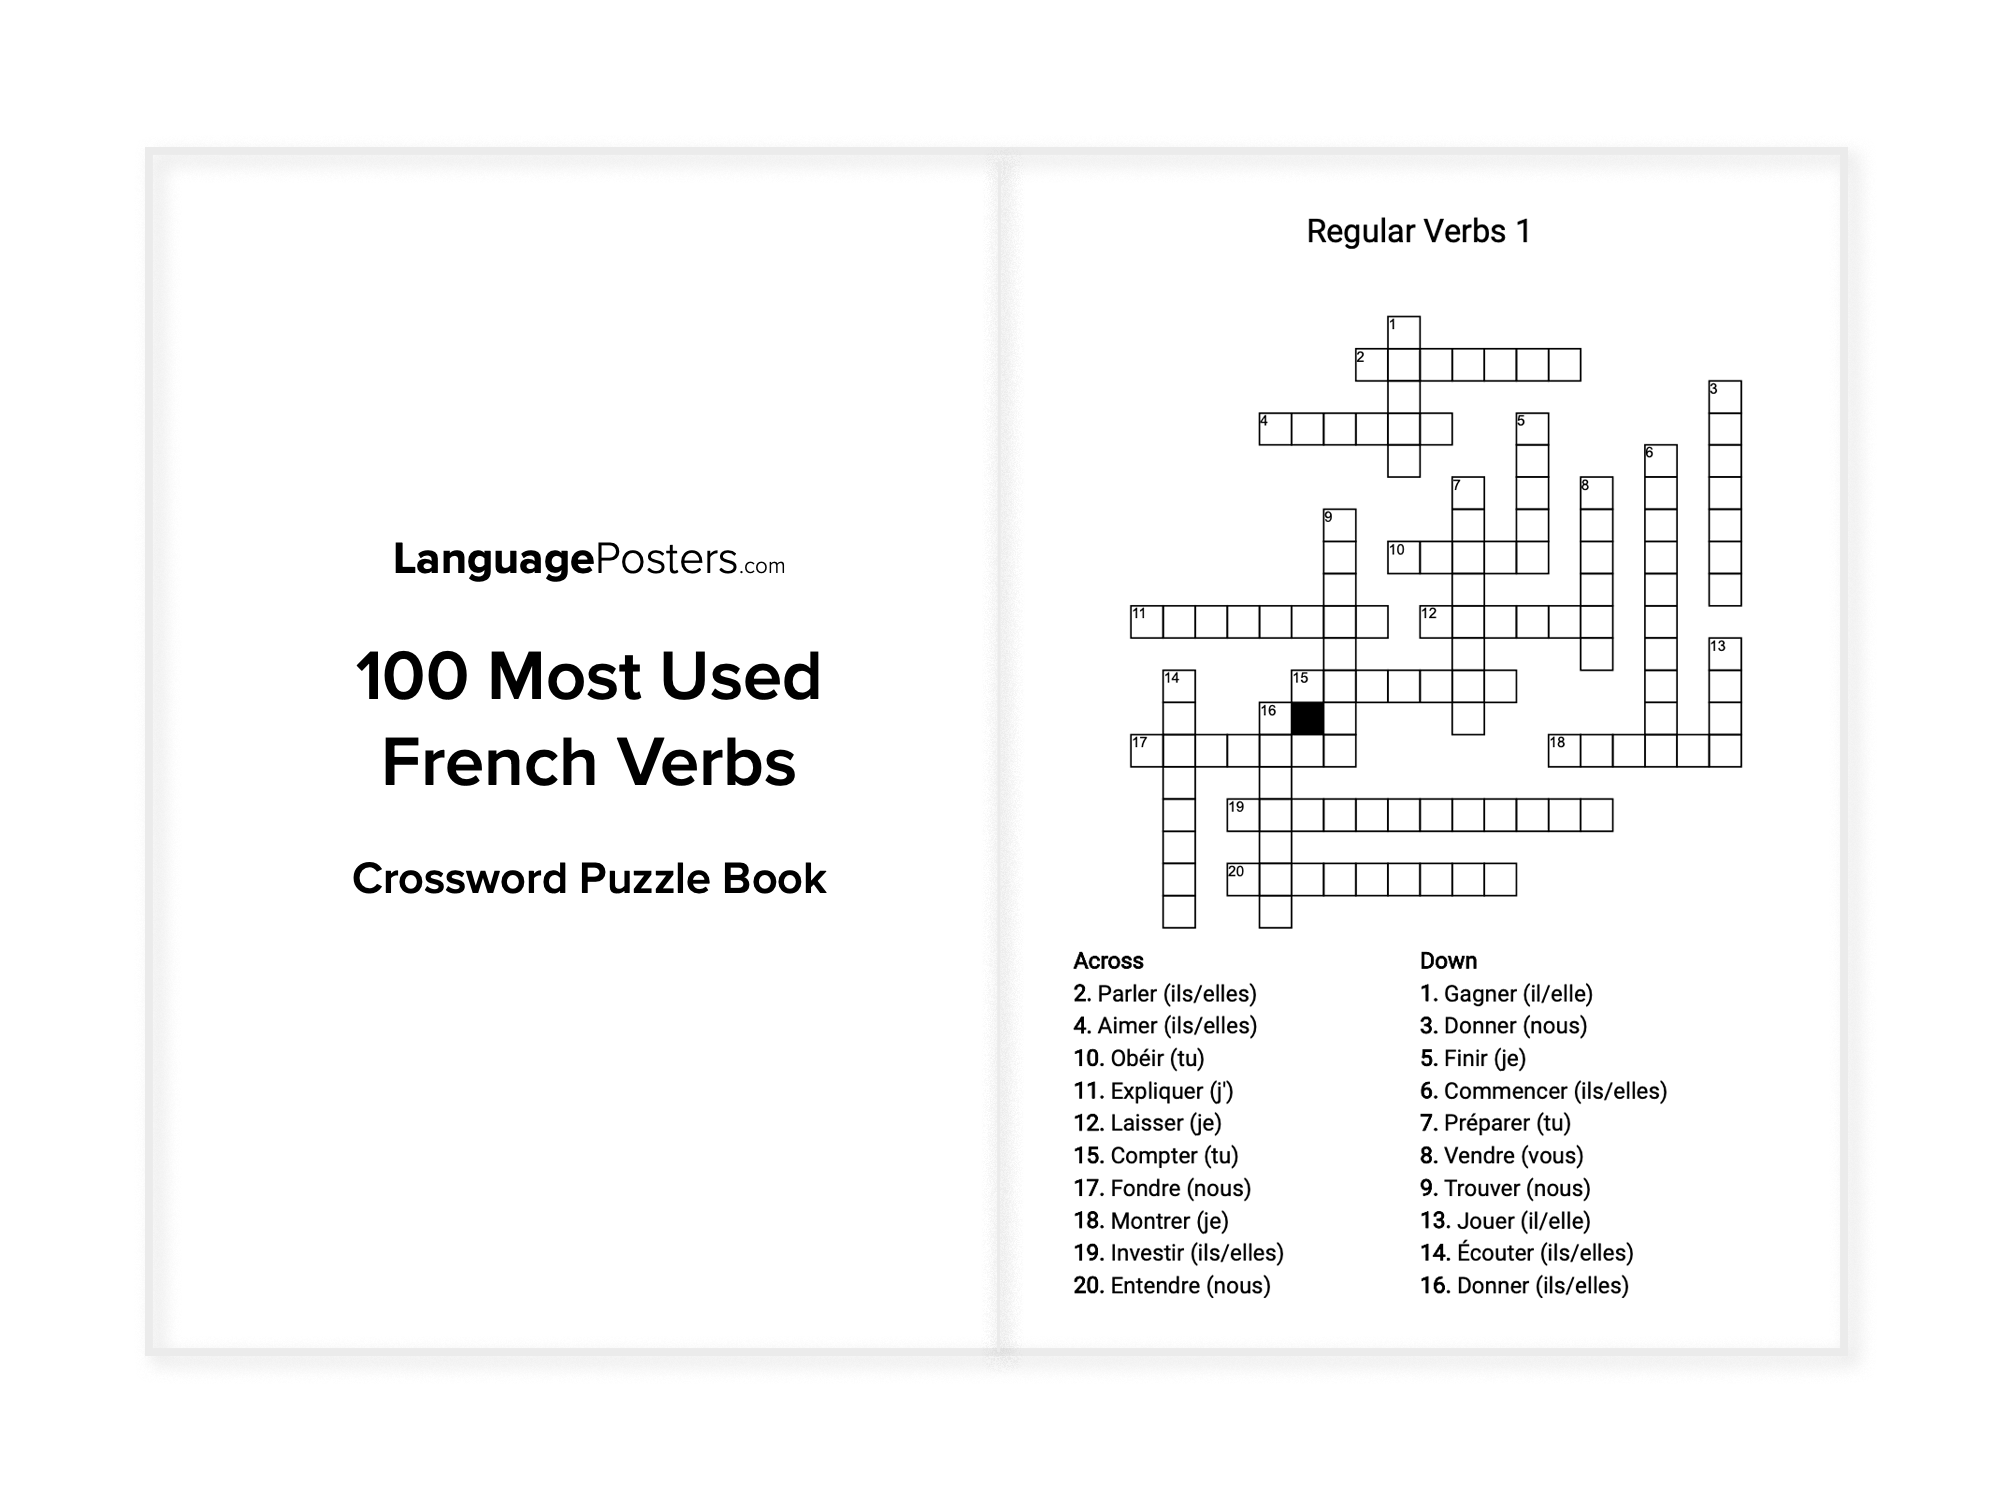 LanguagePosters.com - 100 Most Used French Verbs Crossword Puzzle Book Preview